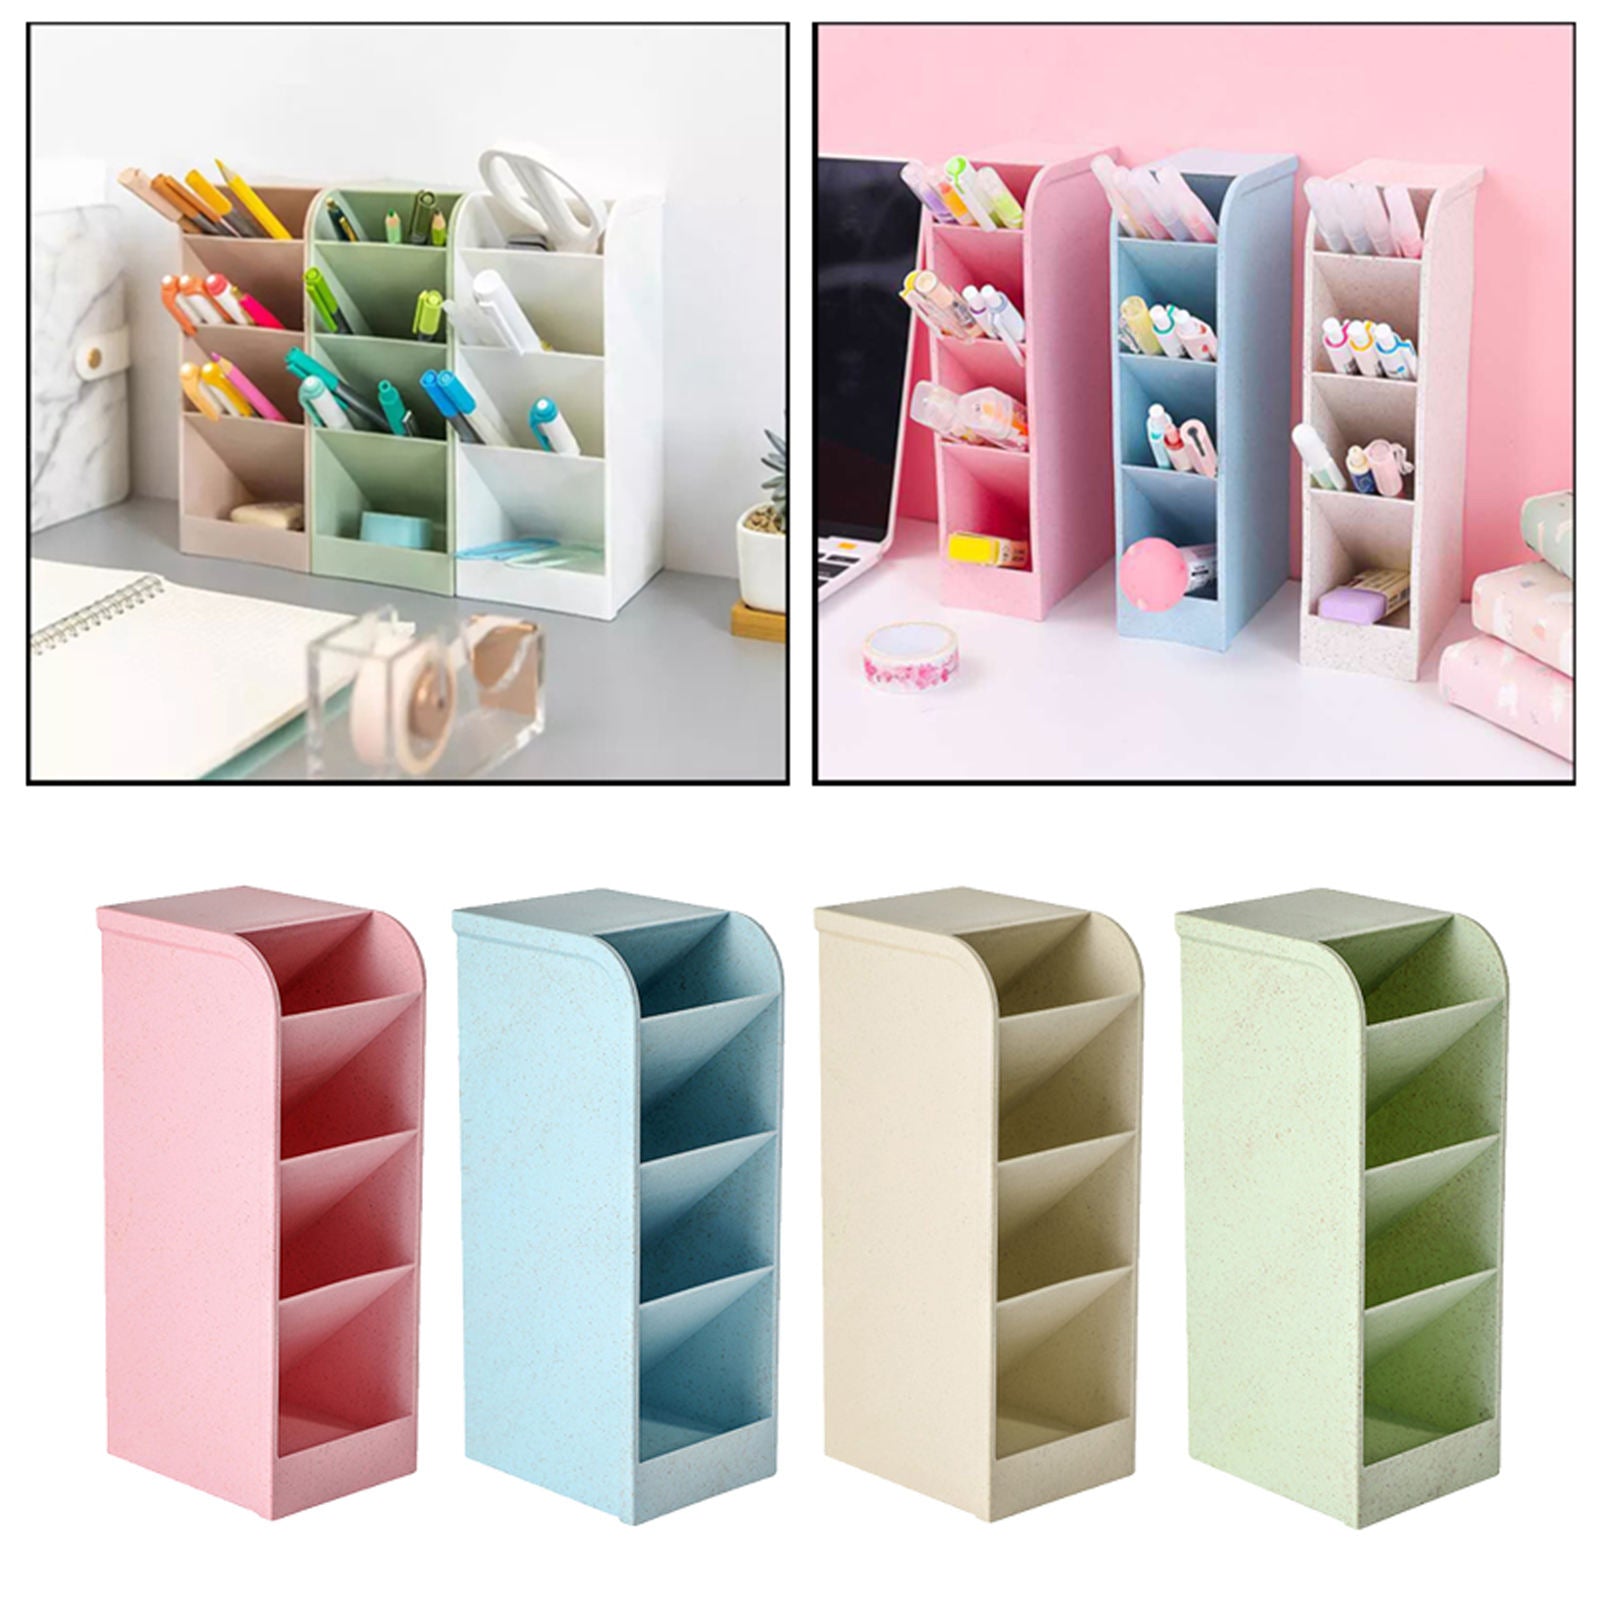 Large Capacity Pen Storage Holder for Office School Home Erasers Supplies